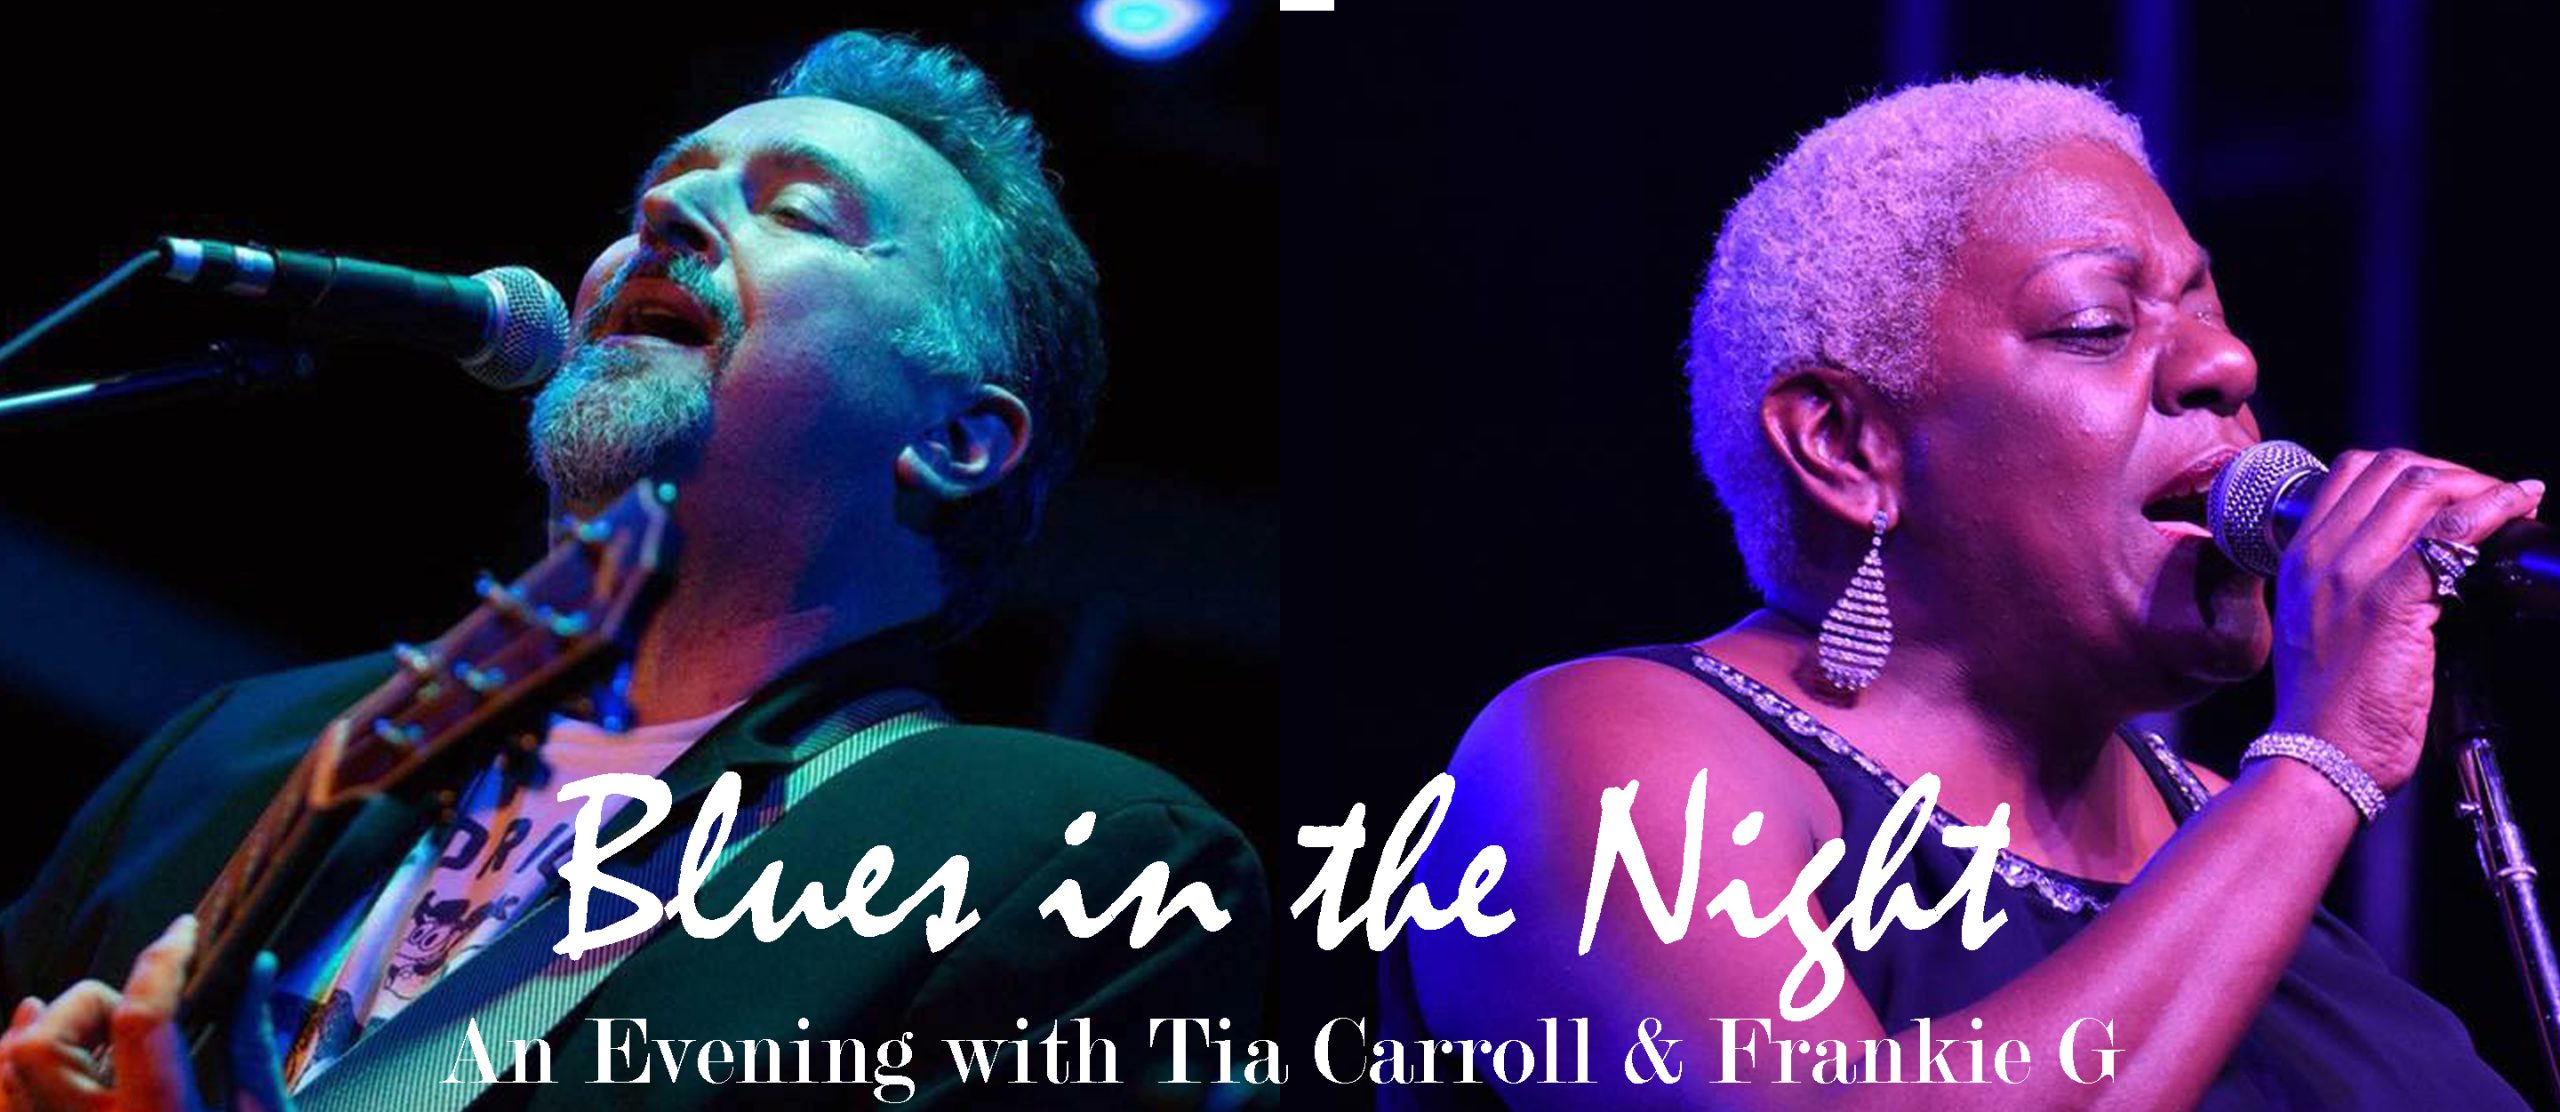 Blues in the Night, An Evening with Tia Carroll & Frankie G